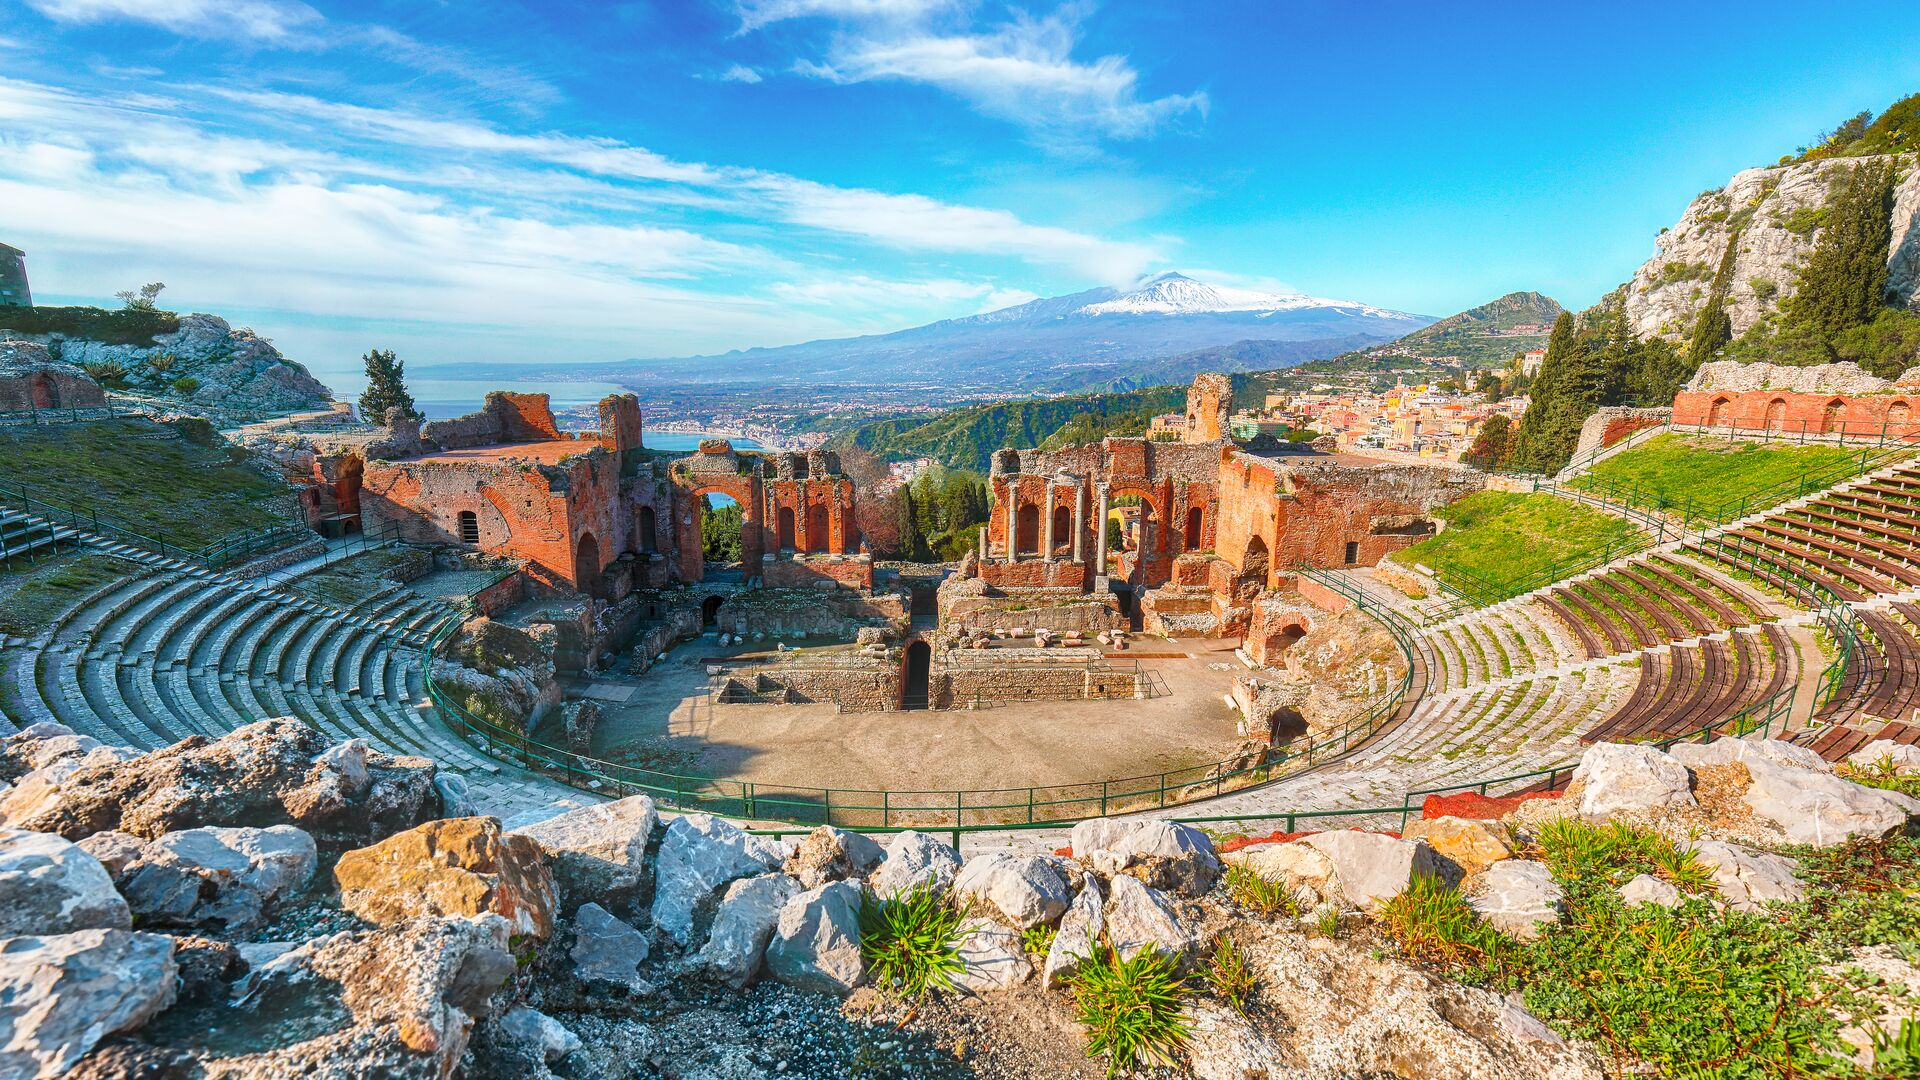 Image of Ancient Greek amphitheatre in Taormina, a redish stone stage with seating flowing up the sides, with spectacular views across the hillsides and a bright blue sky